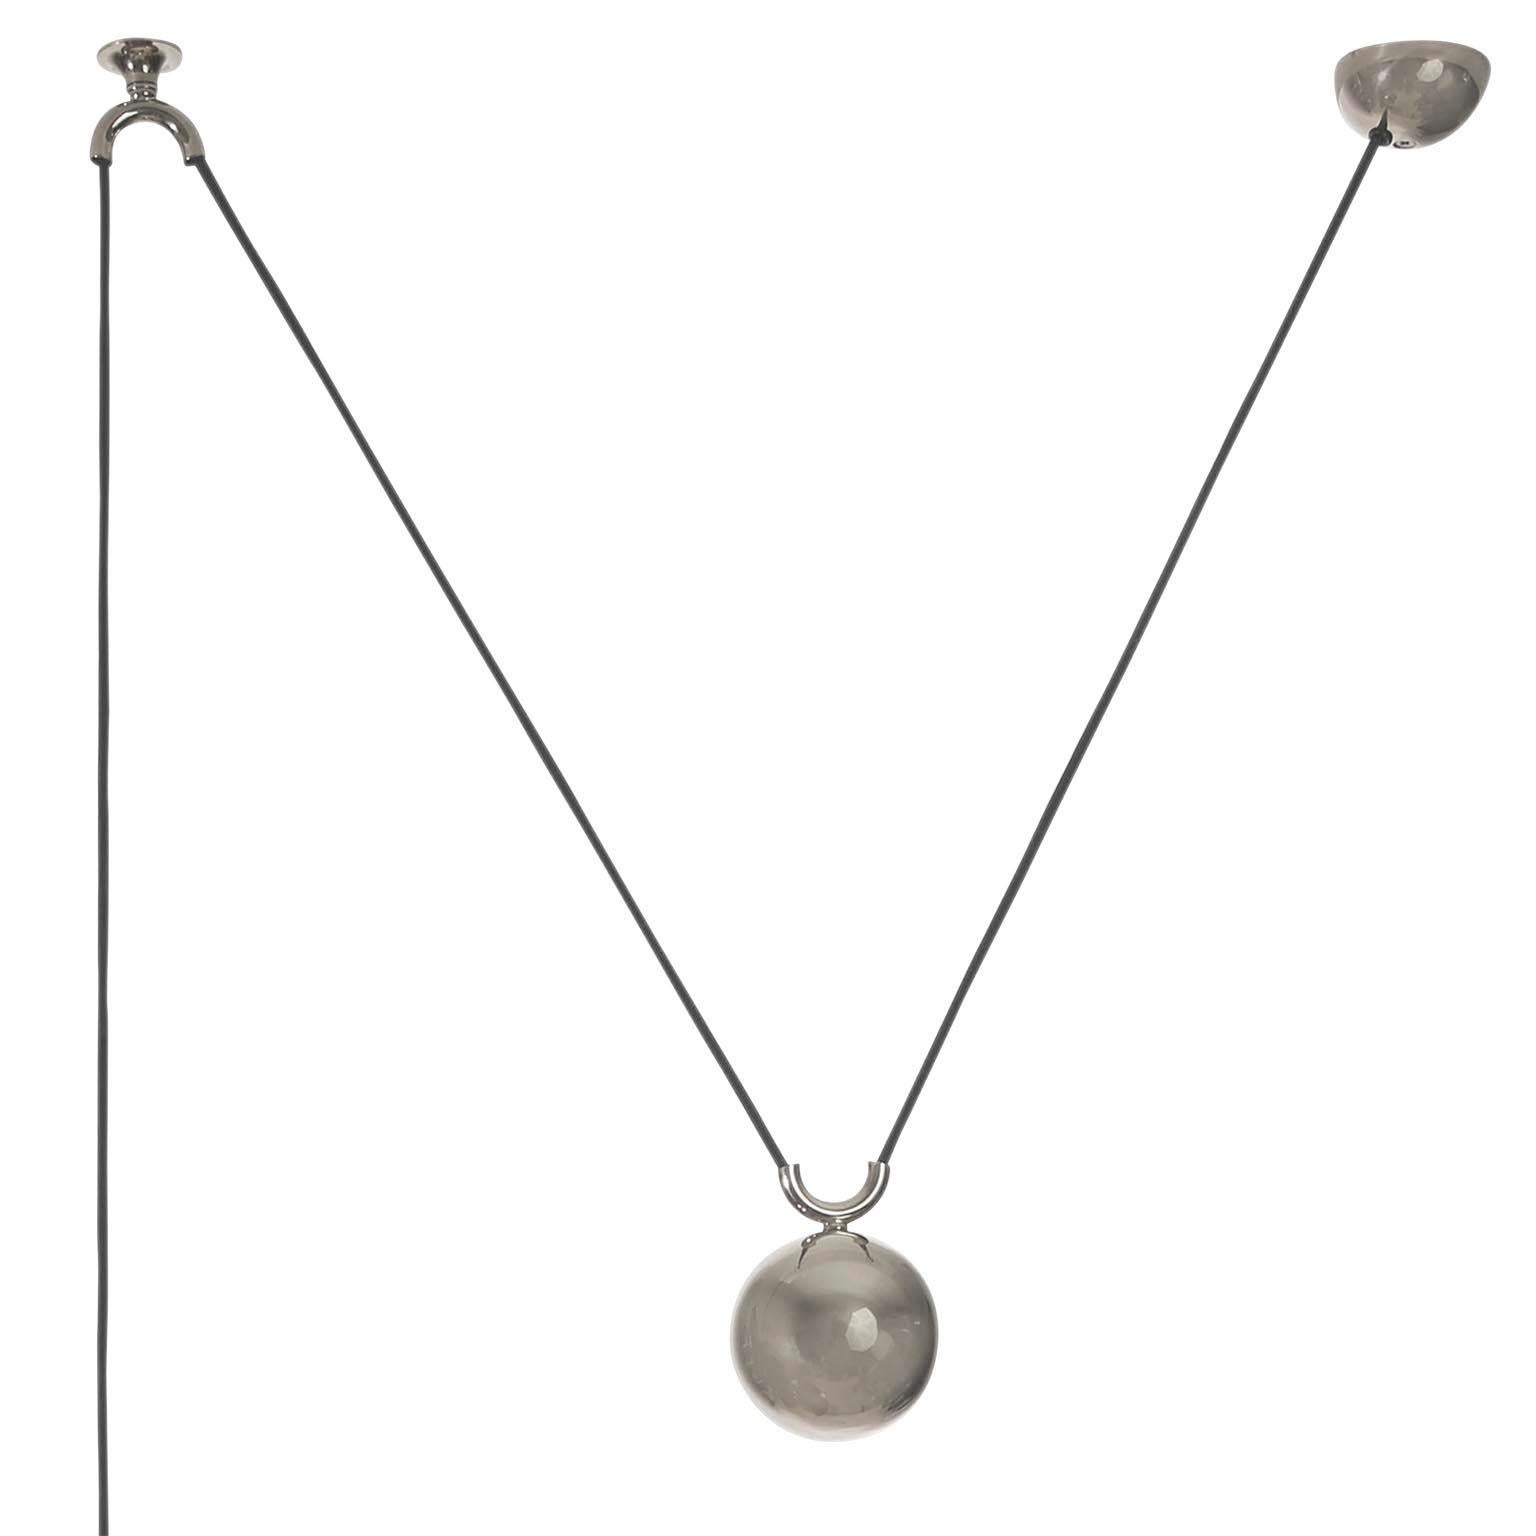 Late 20th Century Florian Schulz Pendant Light Counterweight Counterbalance Patinated Nickel, 1970 For Sale